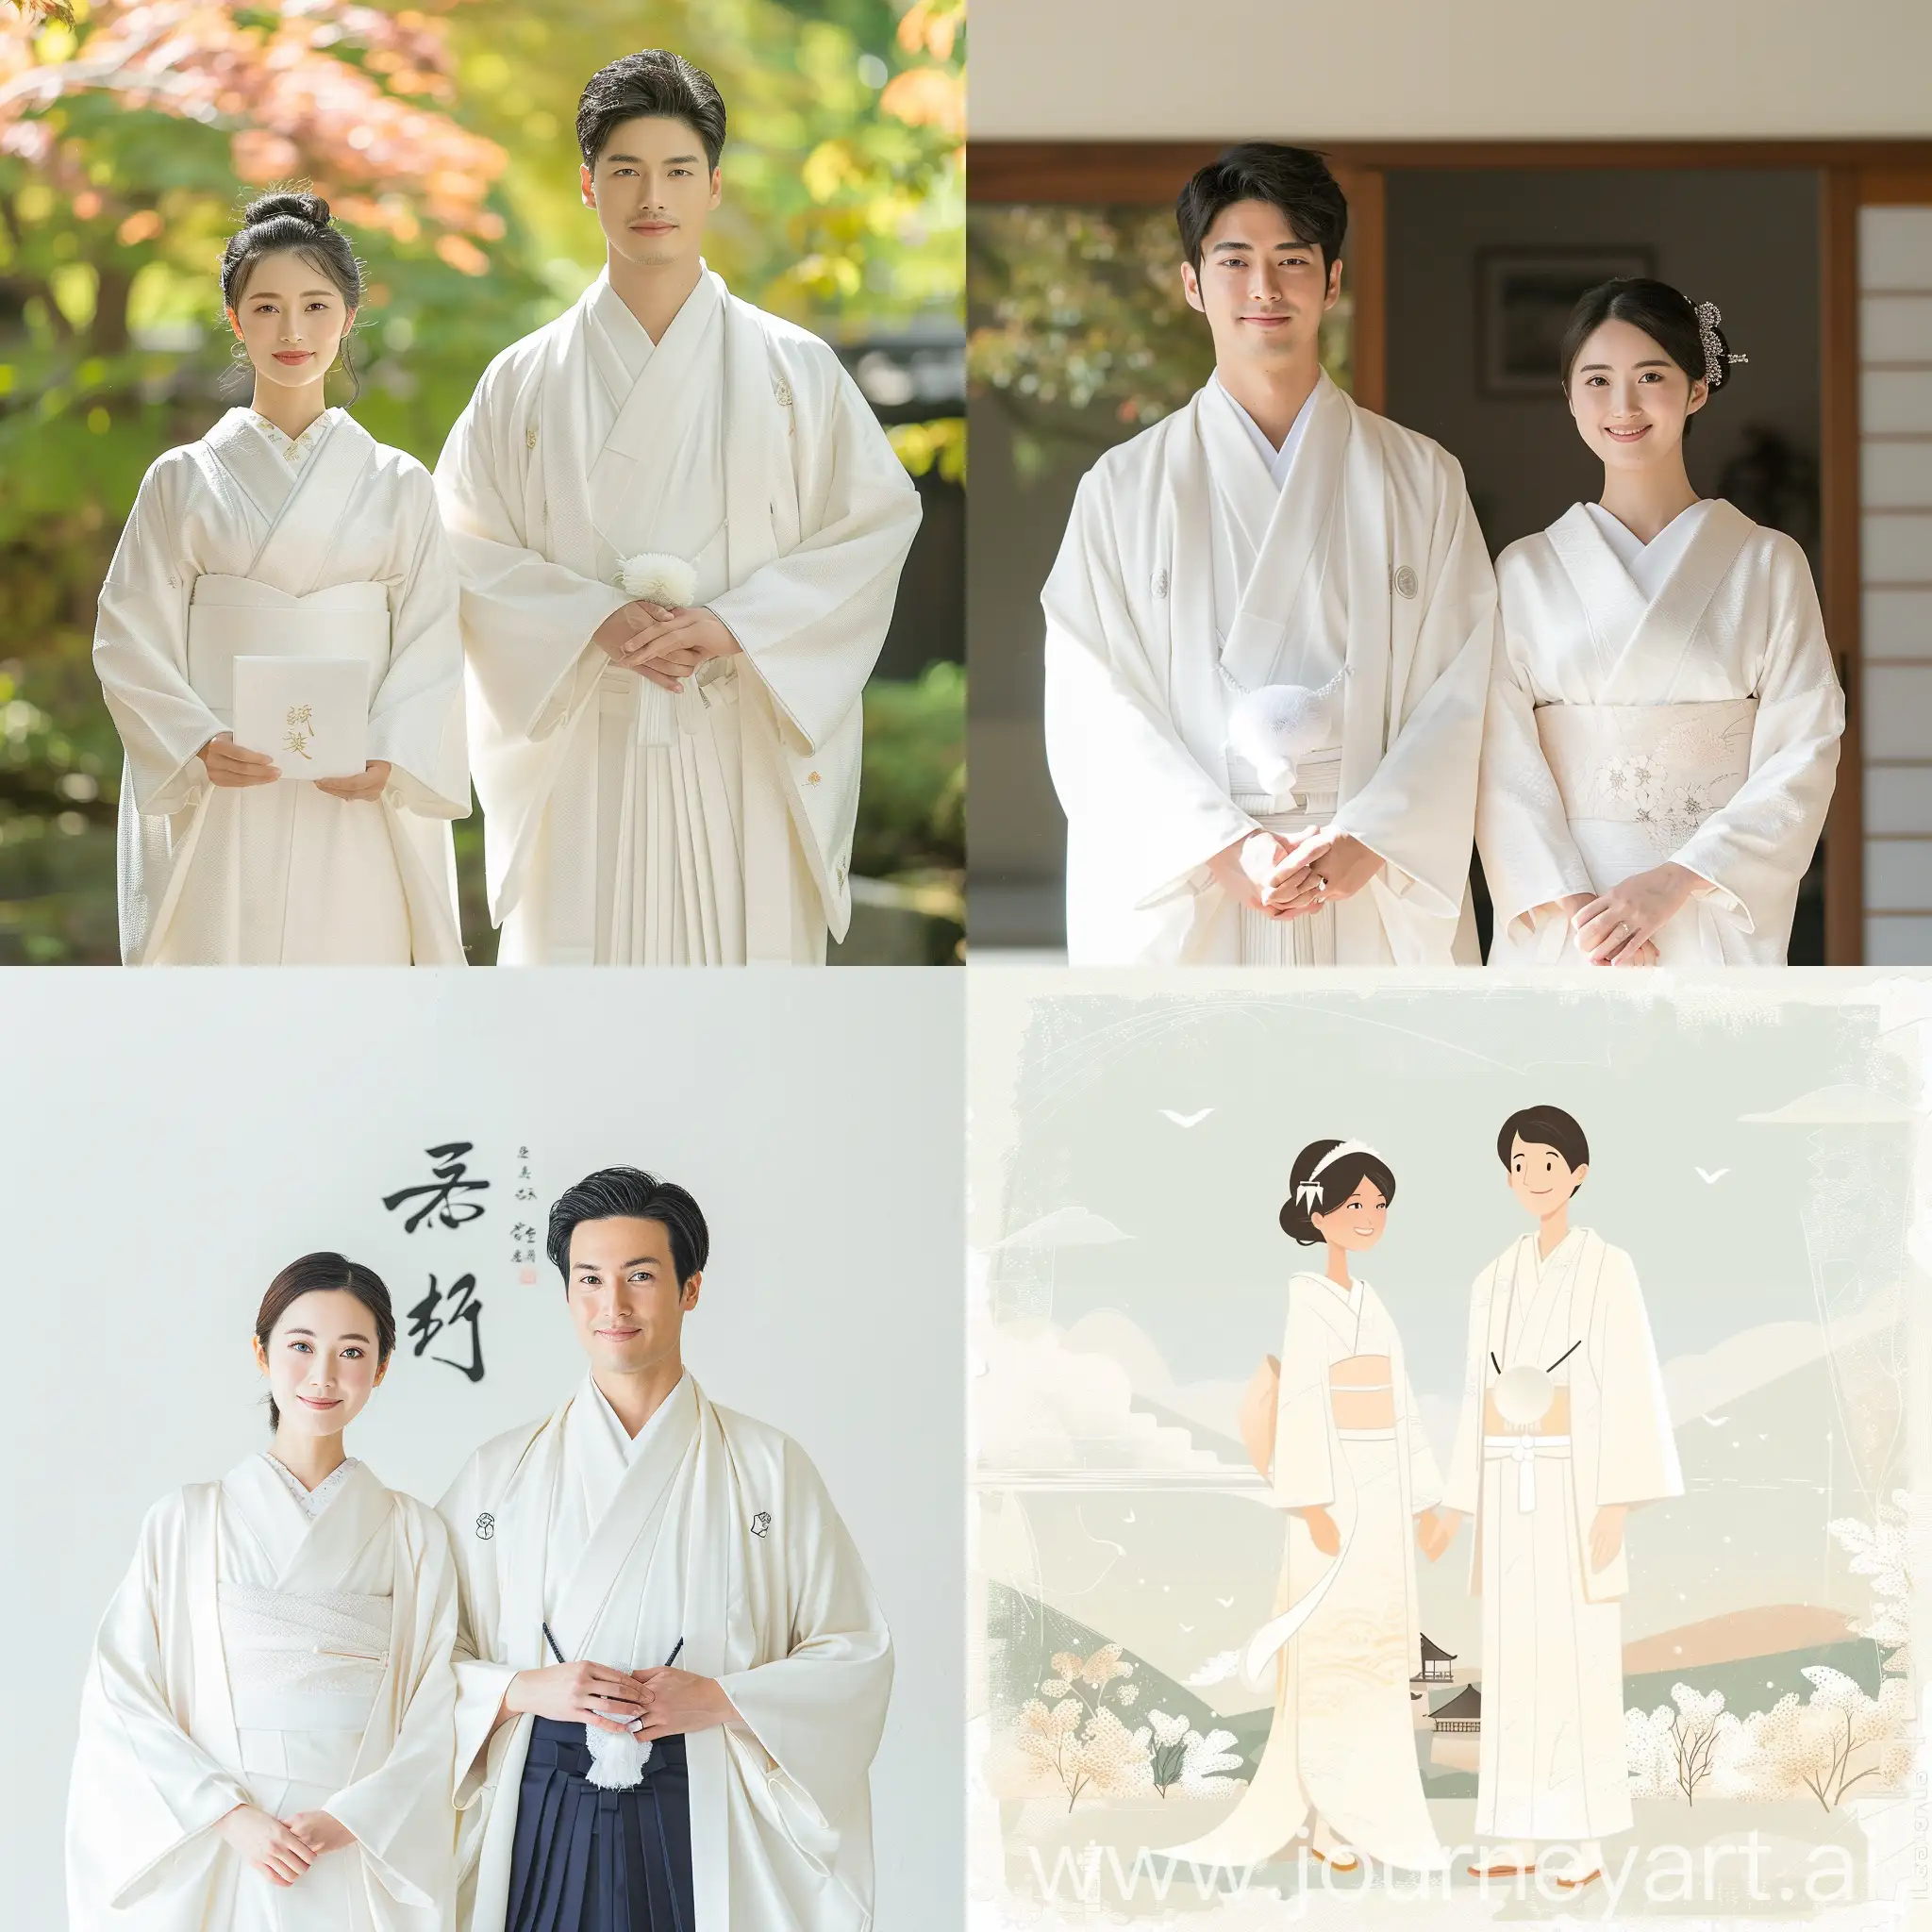 japanese a wedding invitation of the pure bride and groom, ((traditional wedding style)) affectionately standing front, white japan style, charming, design, delicate